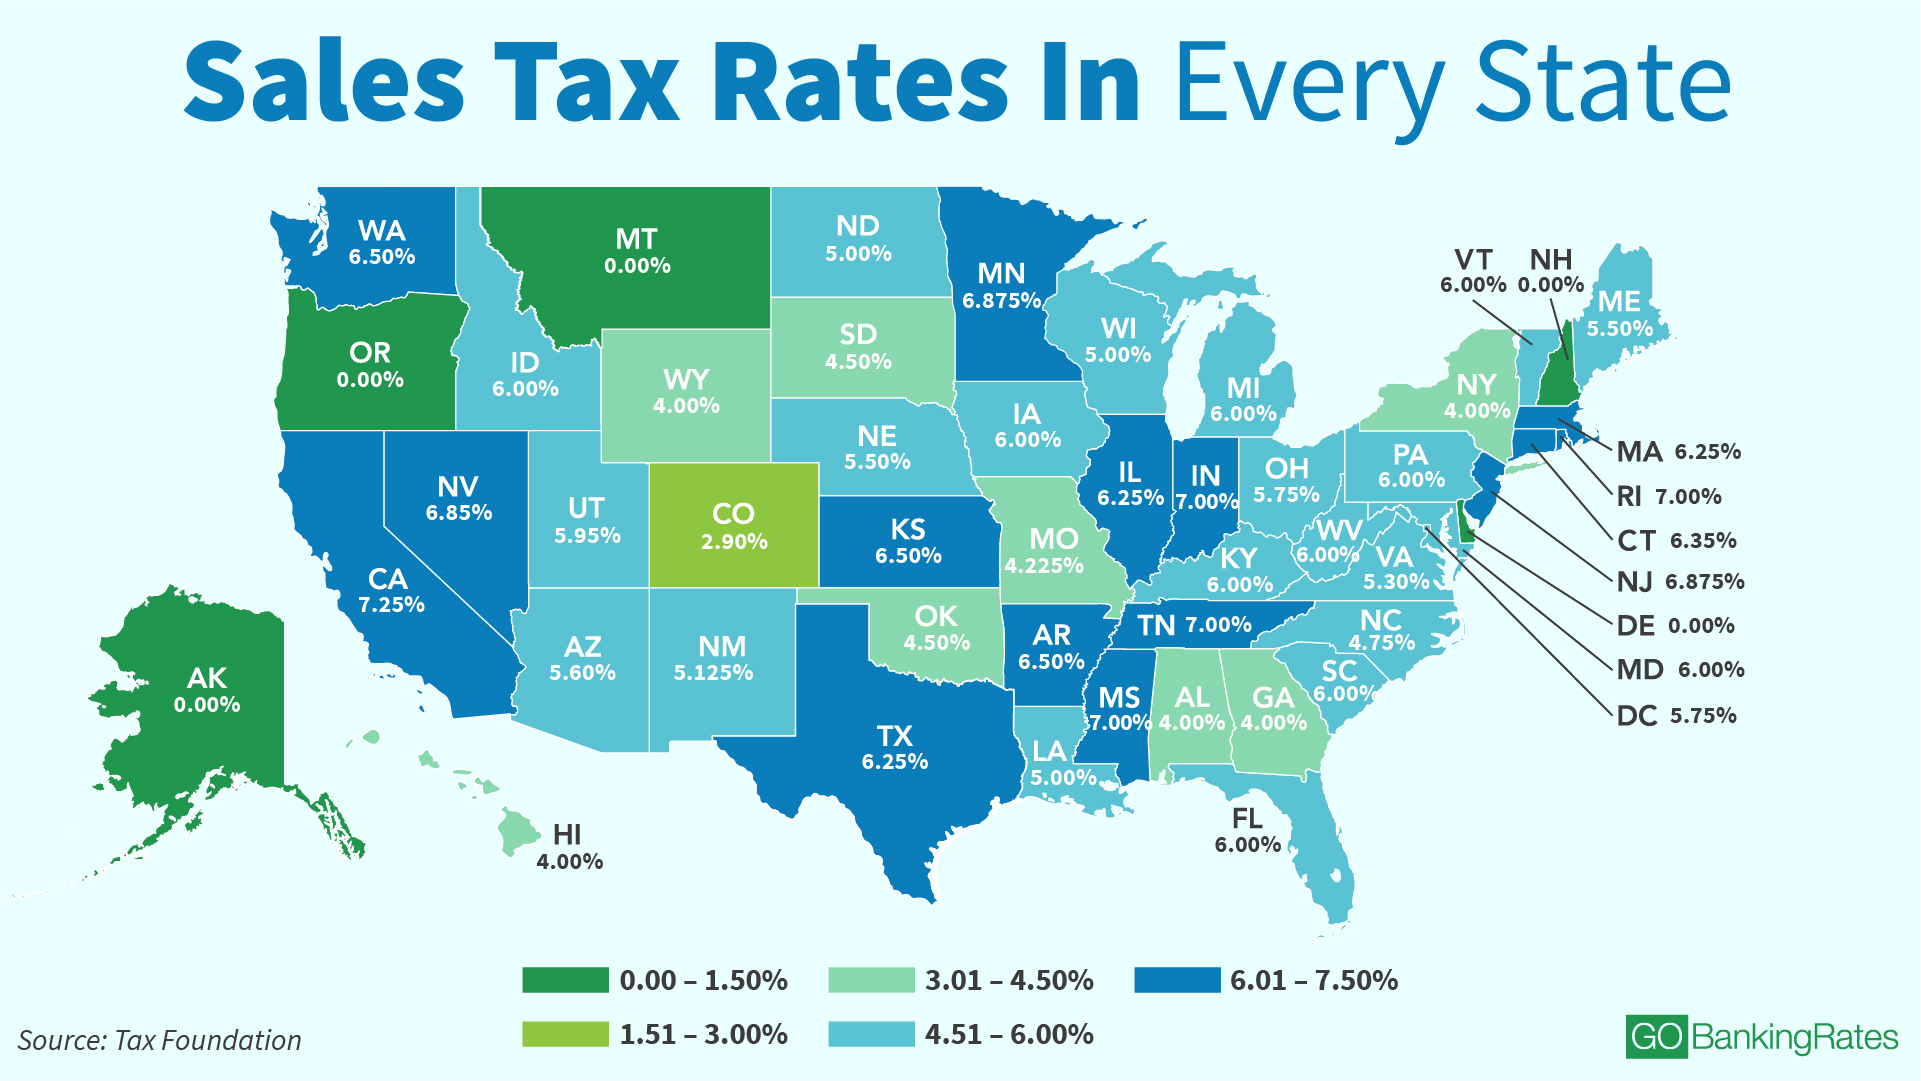 What Is Sales Tax Rate In Temecula Ca?